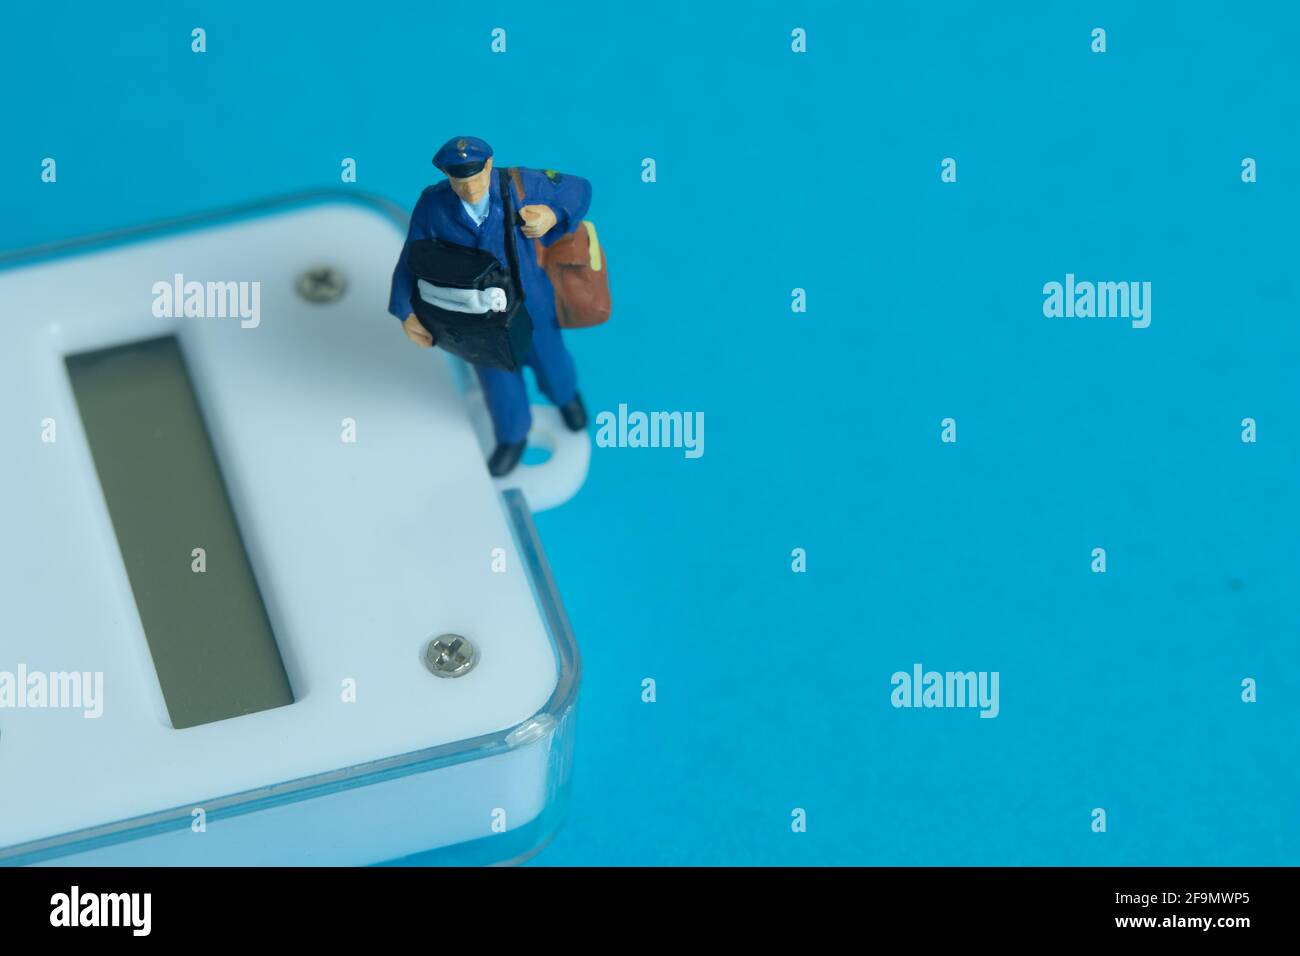 https://c8.alamy.com/comp/2F9MWP5/miniature-people-toys-conceptual-photography-calculate-parcel-package-weight-postman-courier-with-scale-isolated-on-blue-background-2F9MWP5.jpg